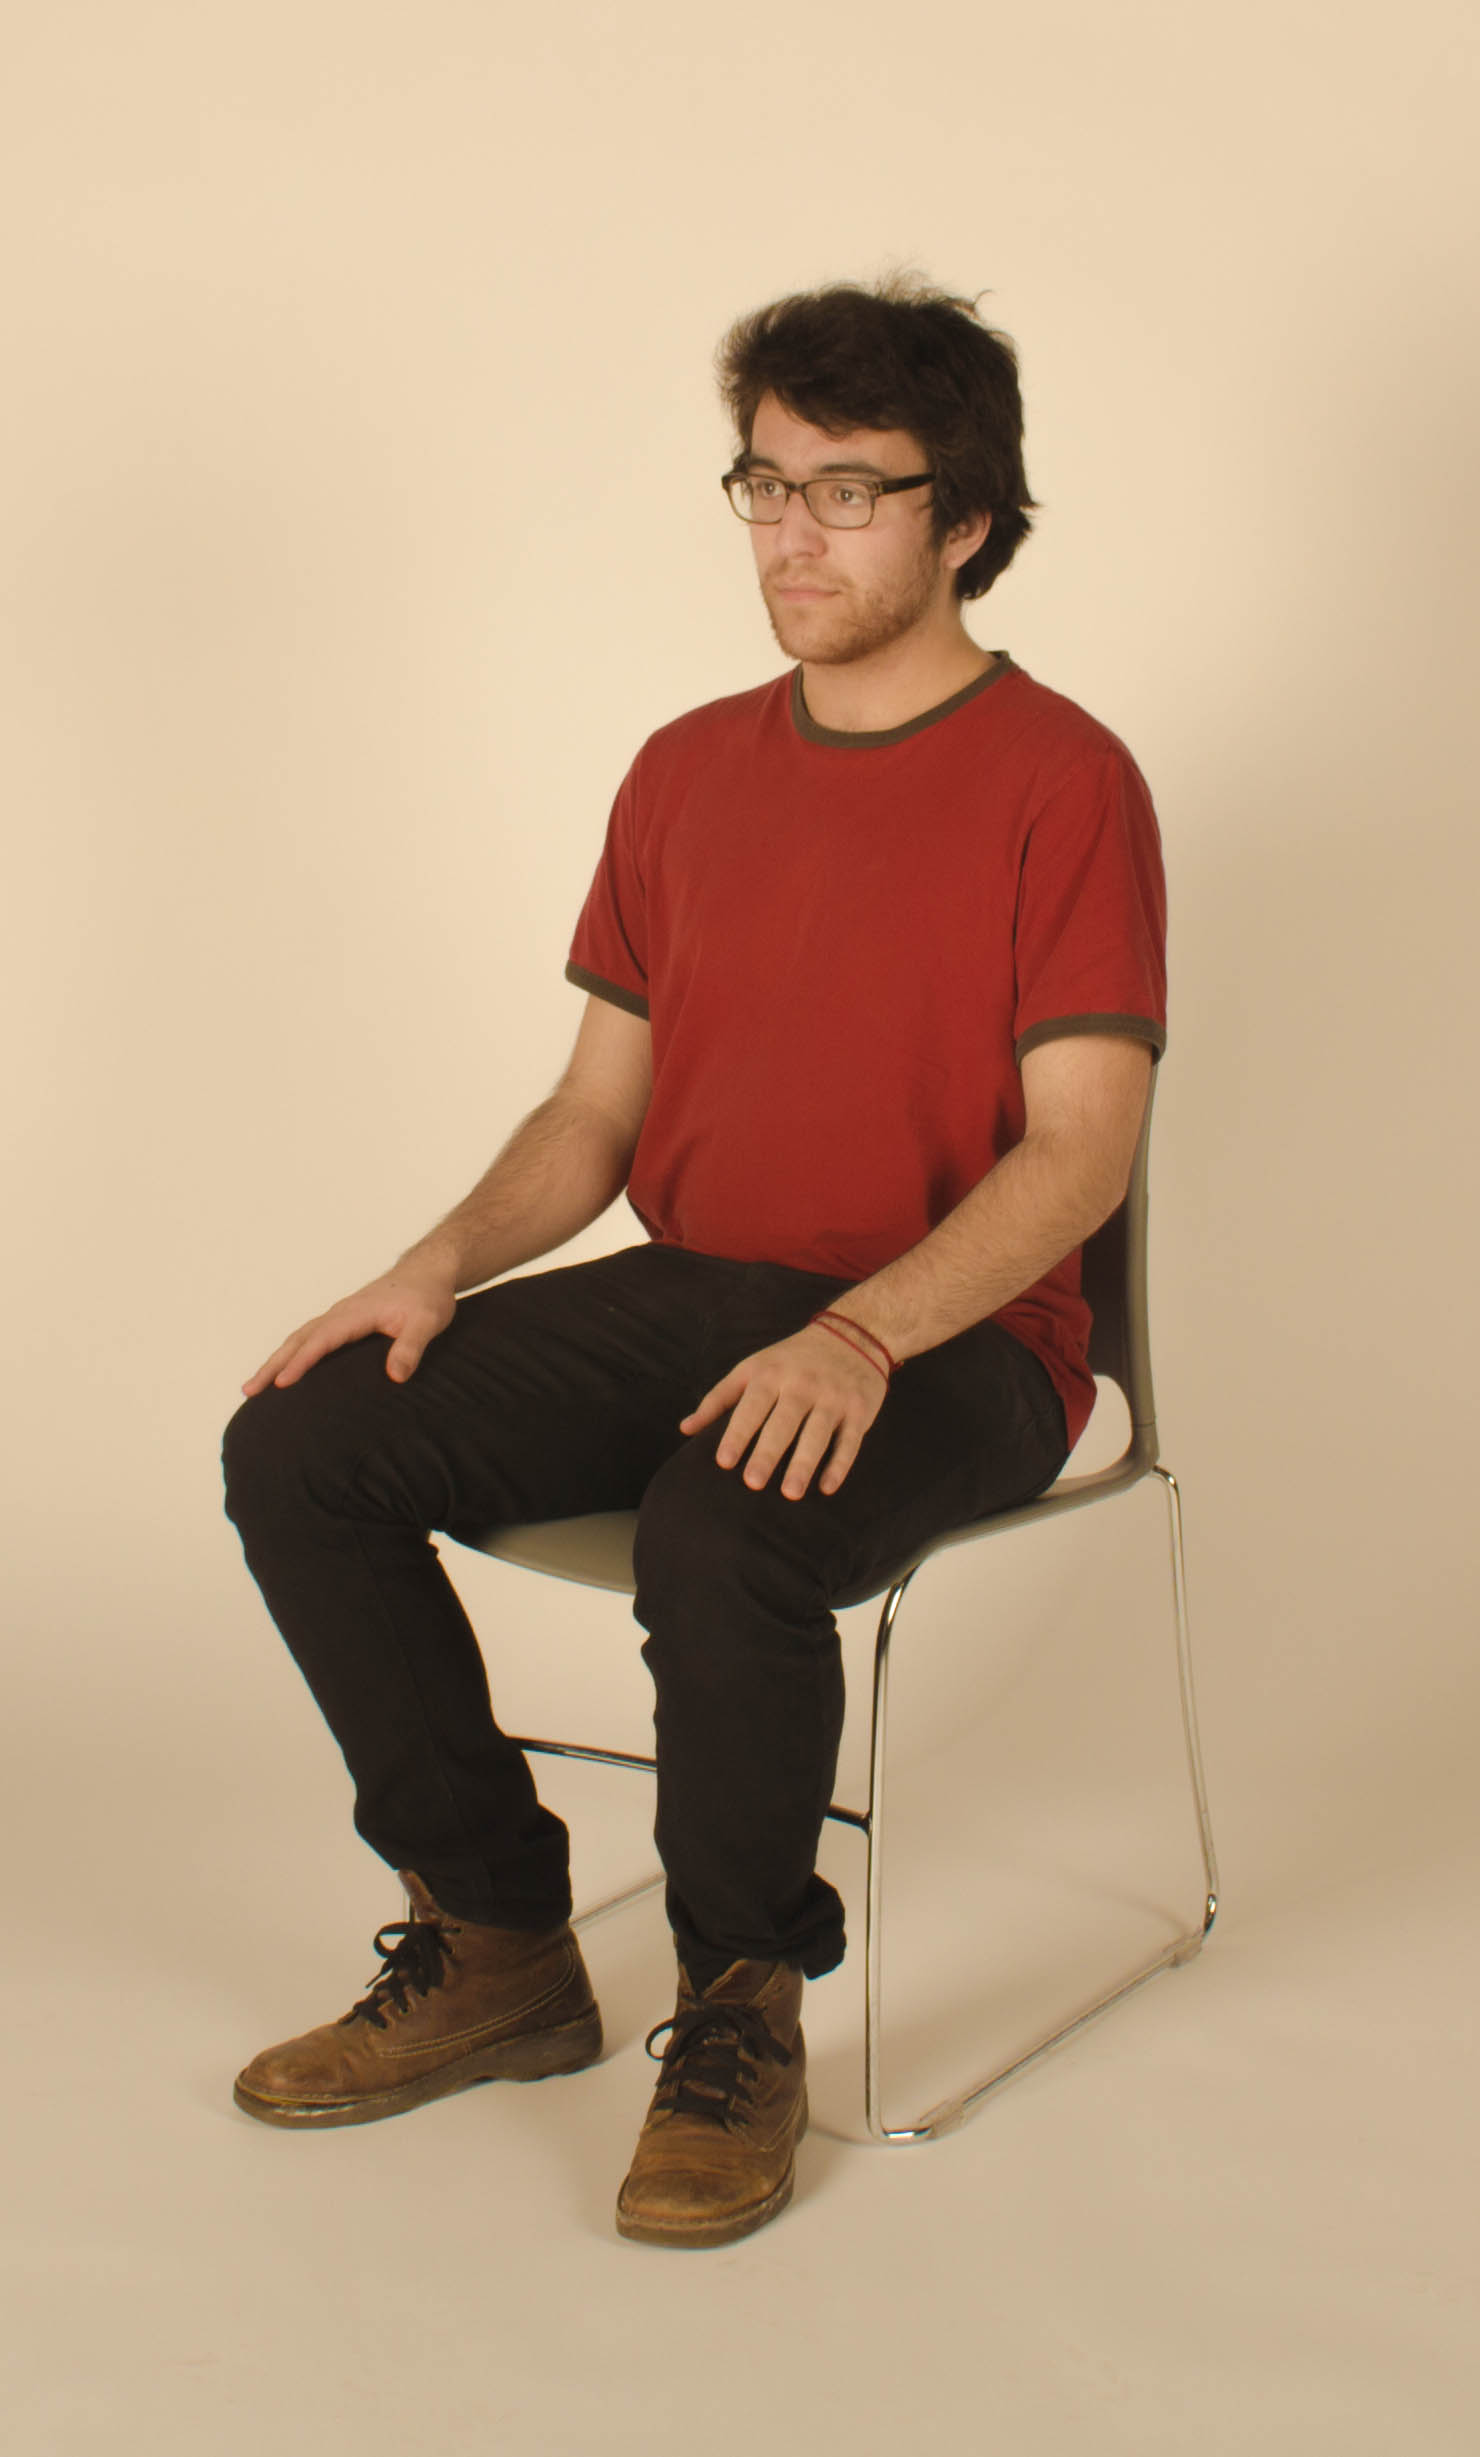 File:Young man sitting in a chair, Feb 2014.jpg - Wikimedia Commons